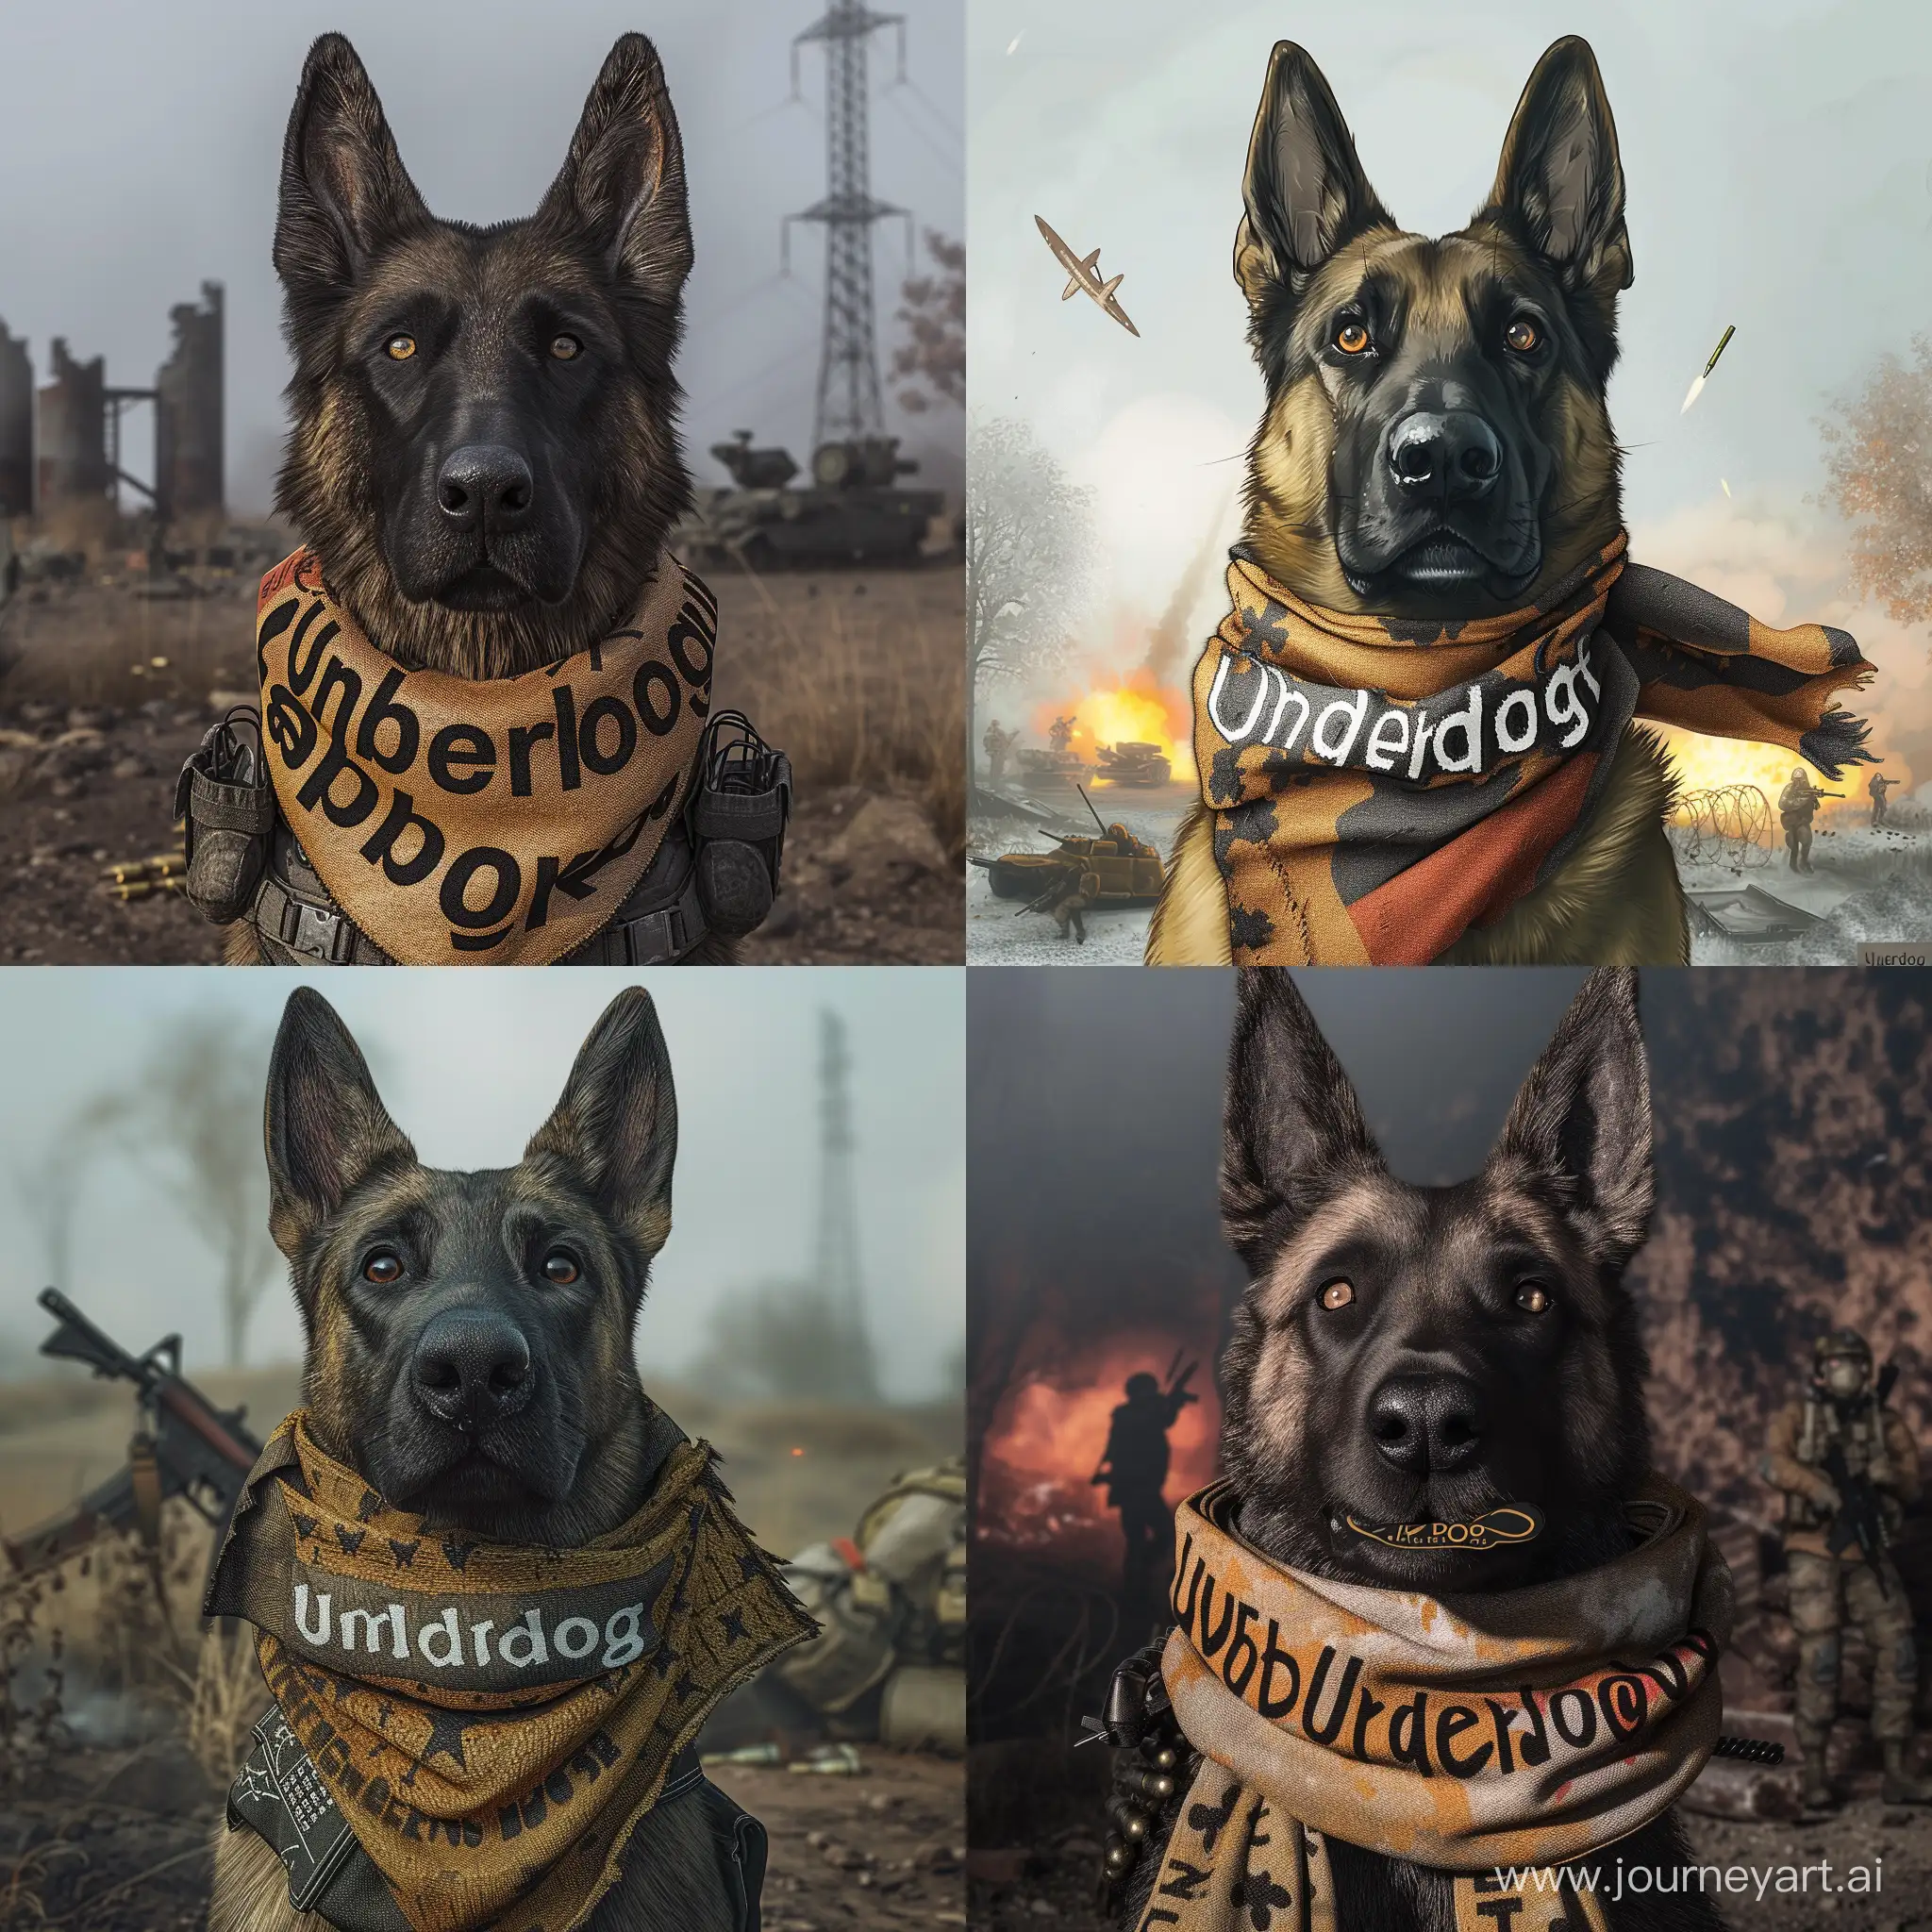 Belgian malinois dog, realistic, wearing scarf around its neck that displays the word “Underdog”, war environment in the backround